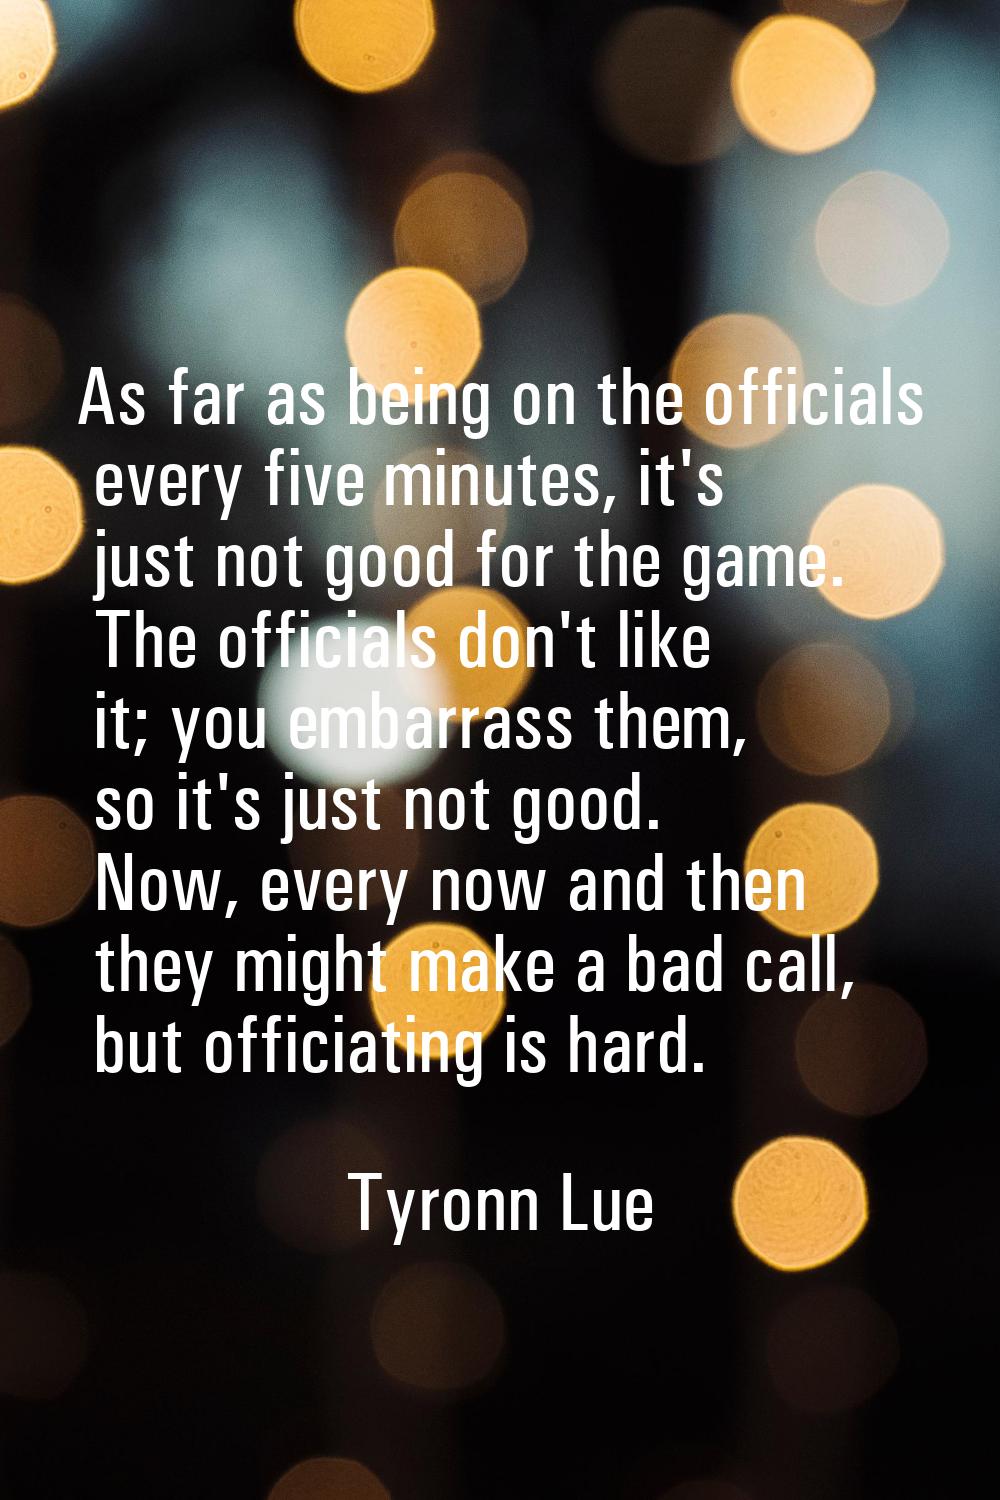 As far as being on the officials every five minutes, it's just not good for the game. The officials